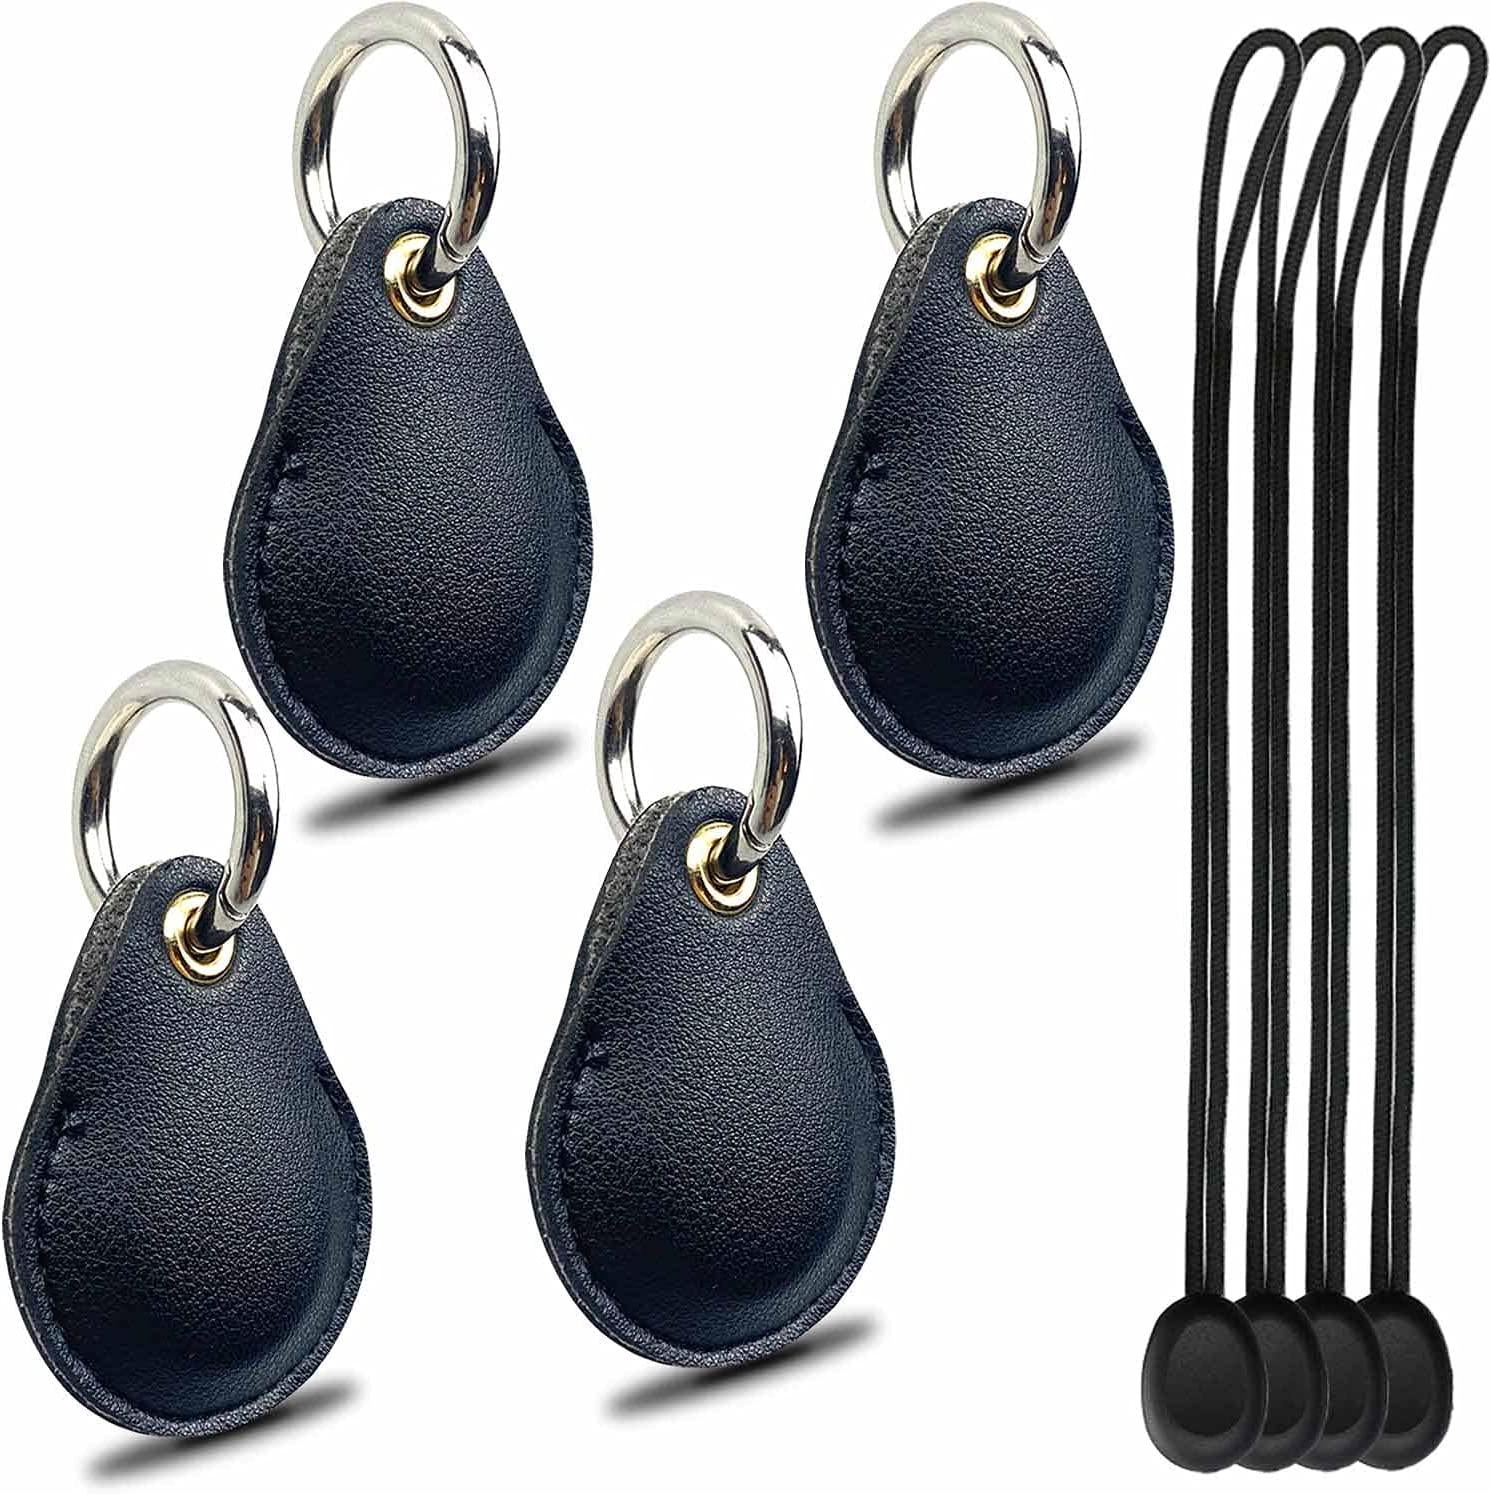 ThingsBag, Leather Case for Apple AirTag with Keychain - 4 Pcs